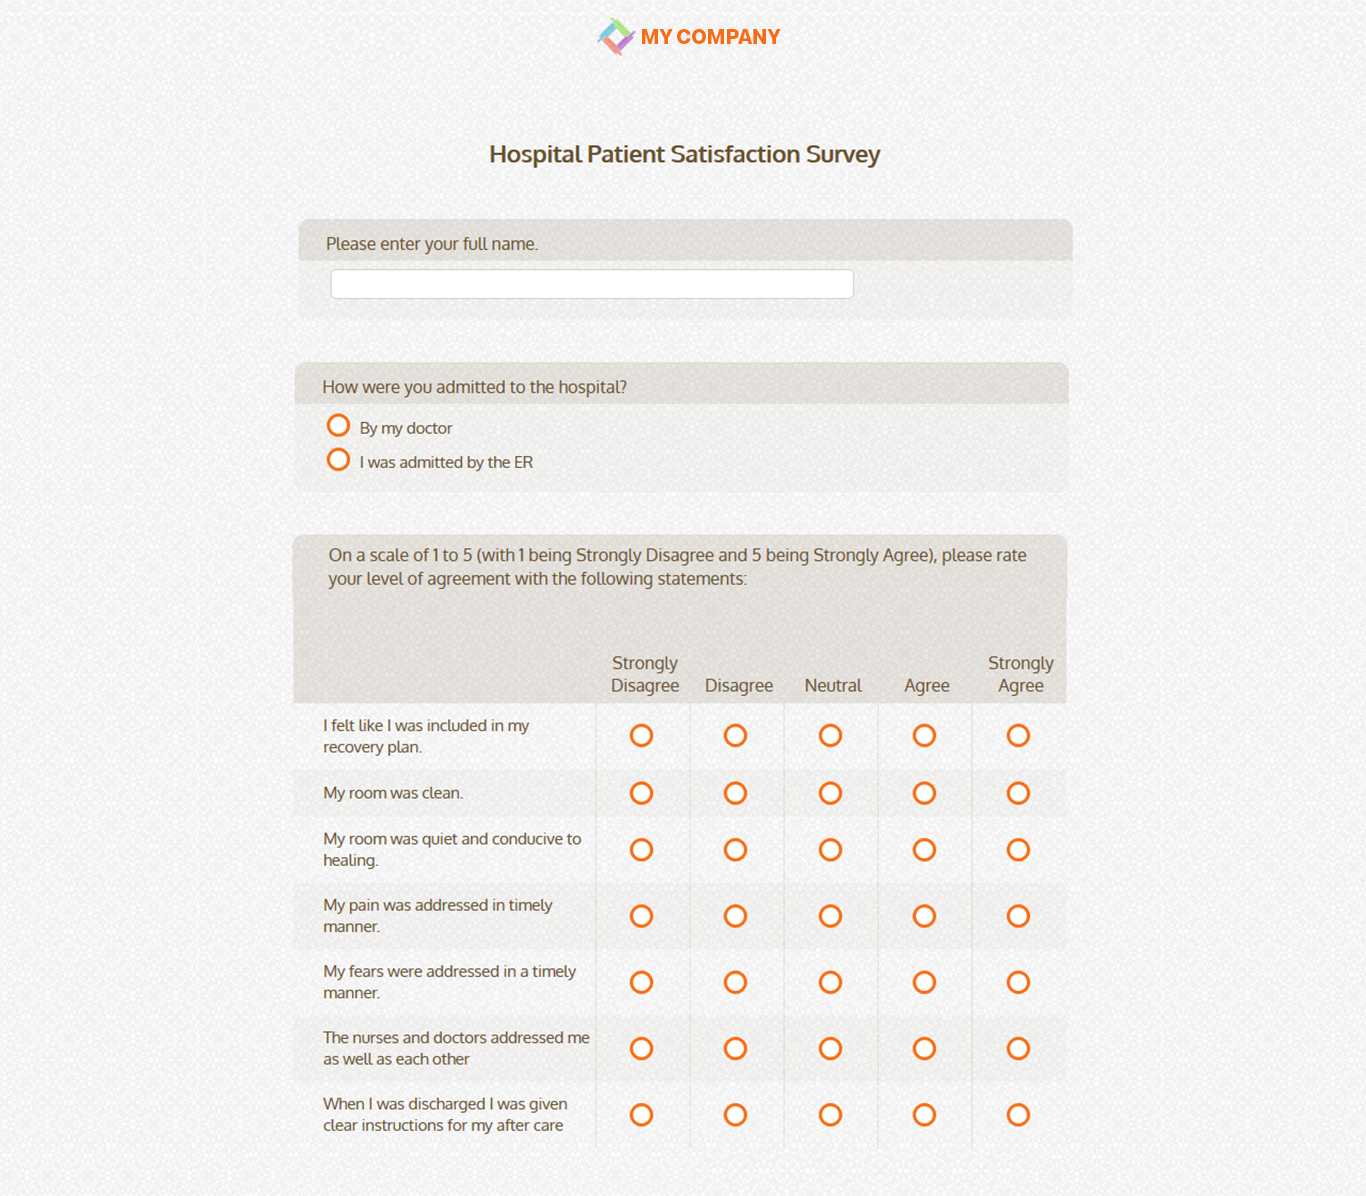 Patient Satisfaction Survey Template [21 Questions] | Sogosurvey Pertaining To Customer Satisfaction Report Template